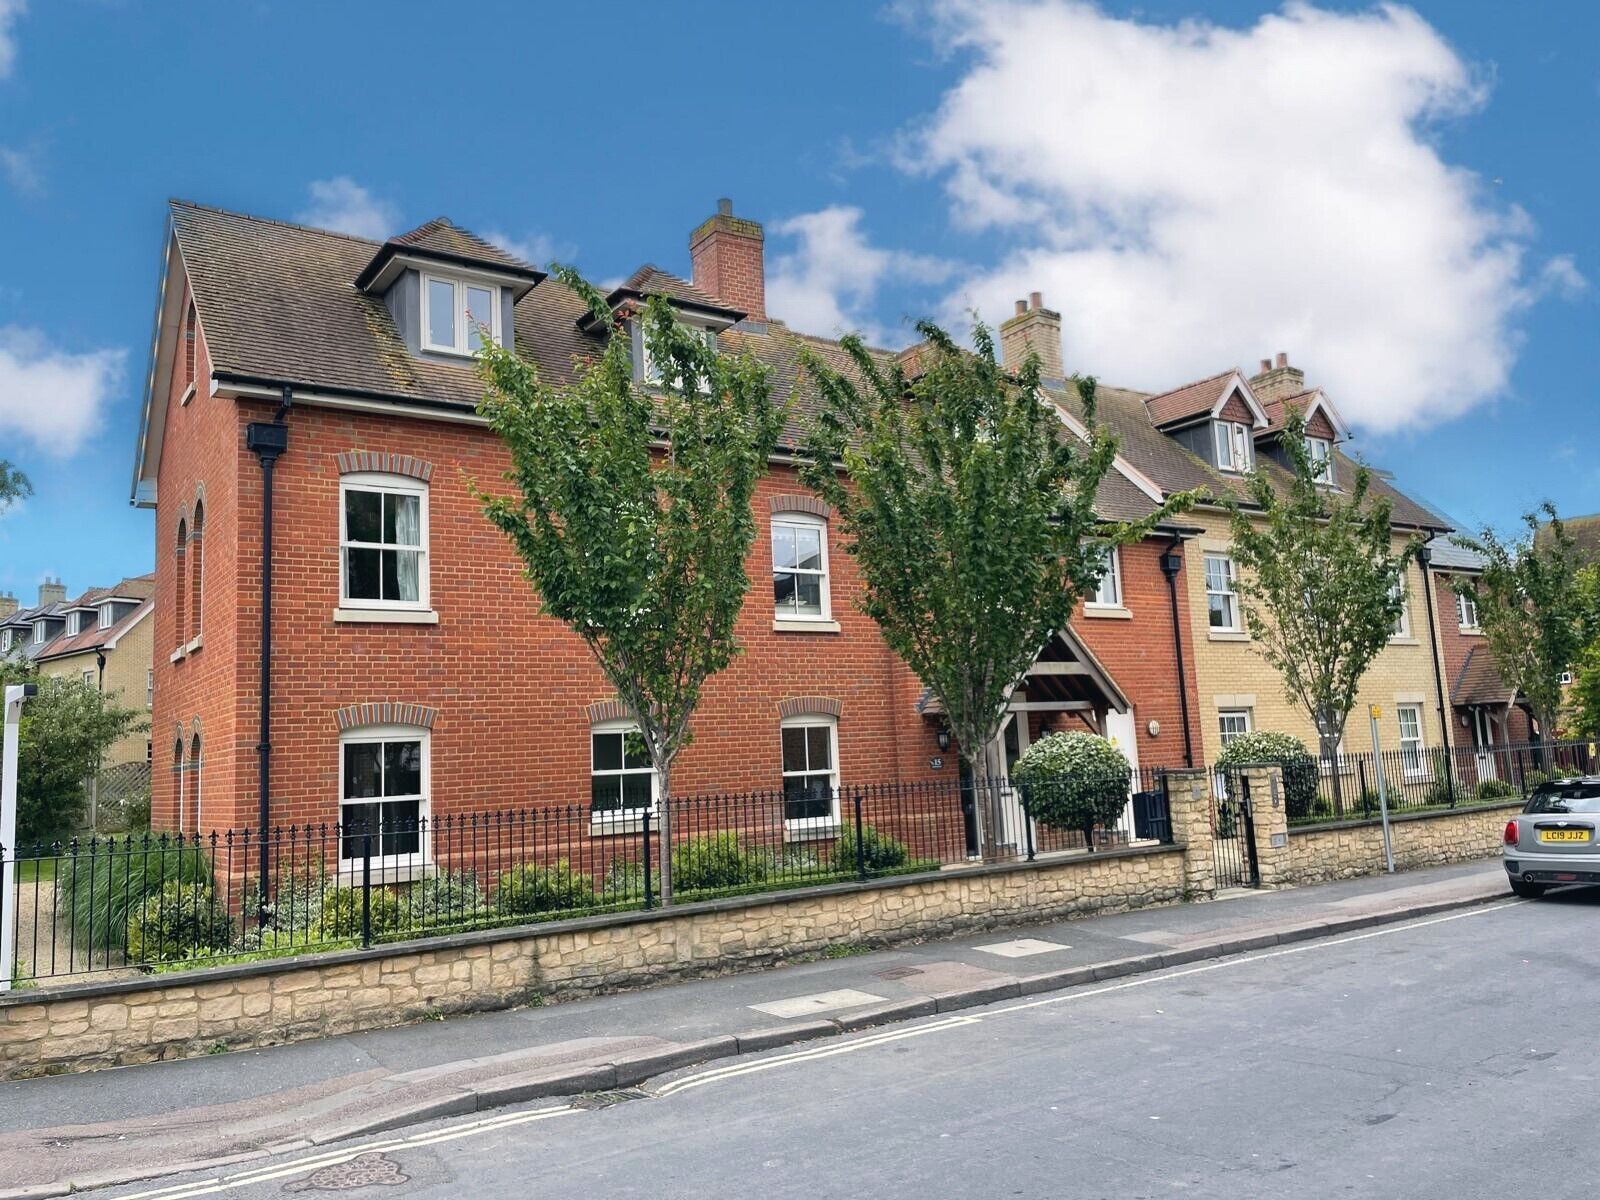 2 bedroom  flat for sale Church Street, Wantage, OX12, main image